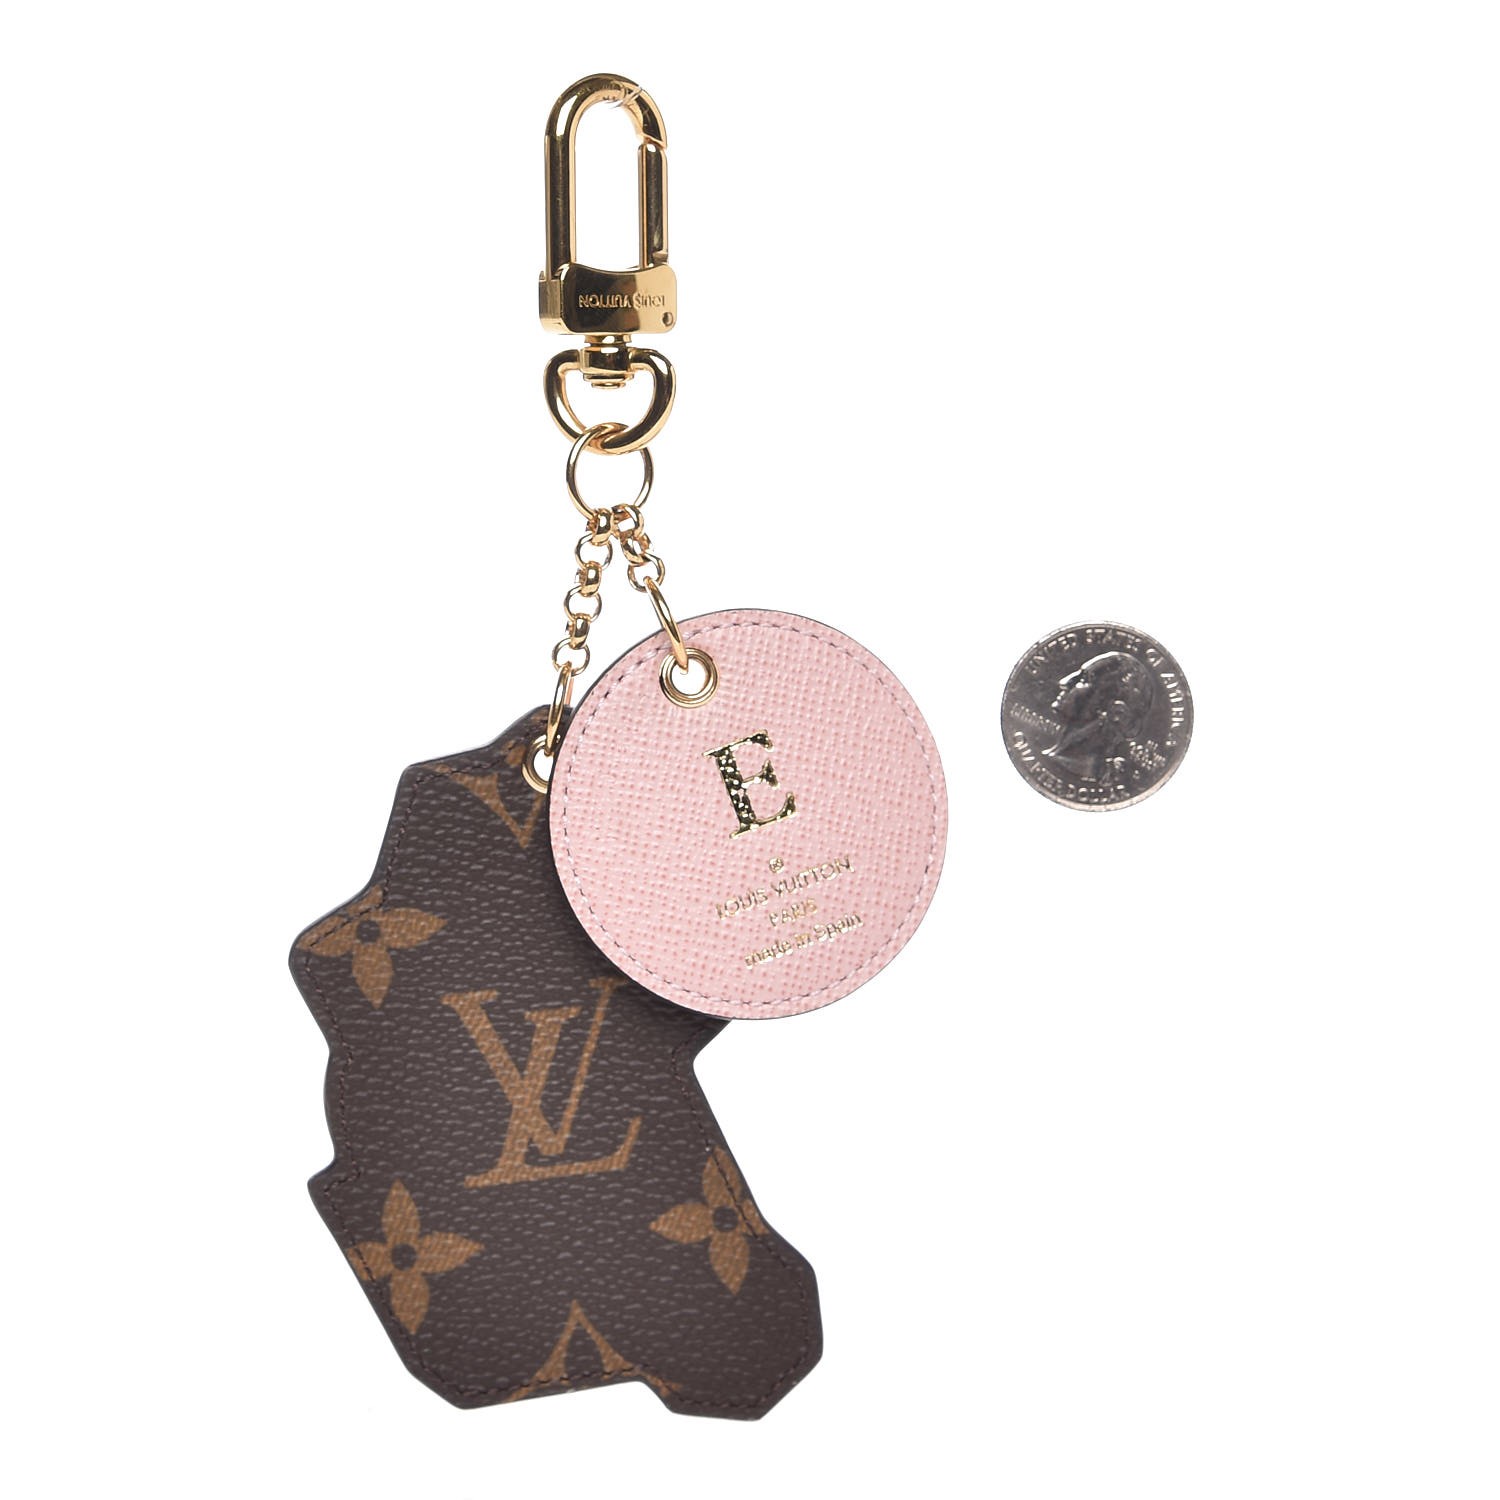 Louis Vuitton Mister Keepall Key Holder and Bag Charm